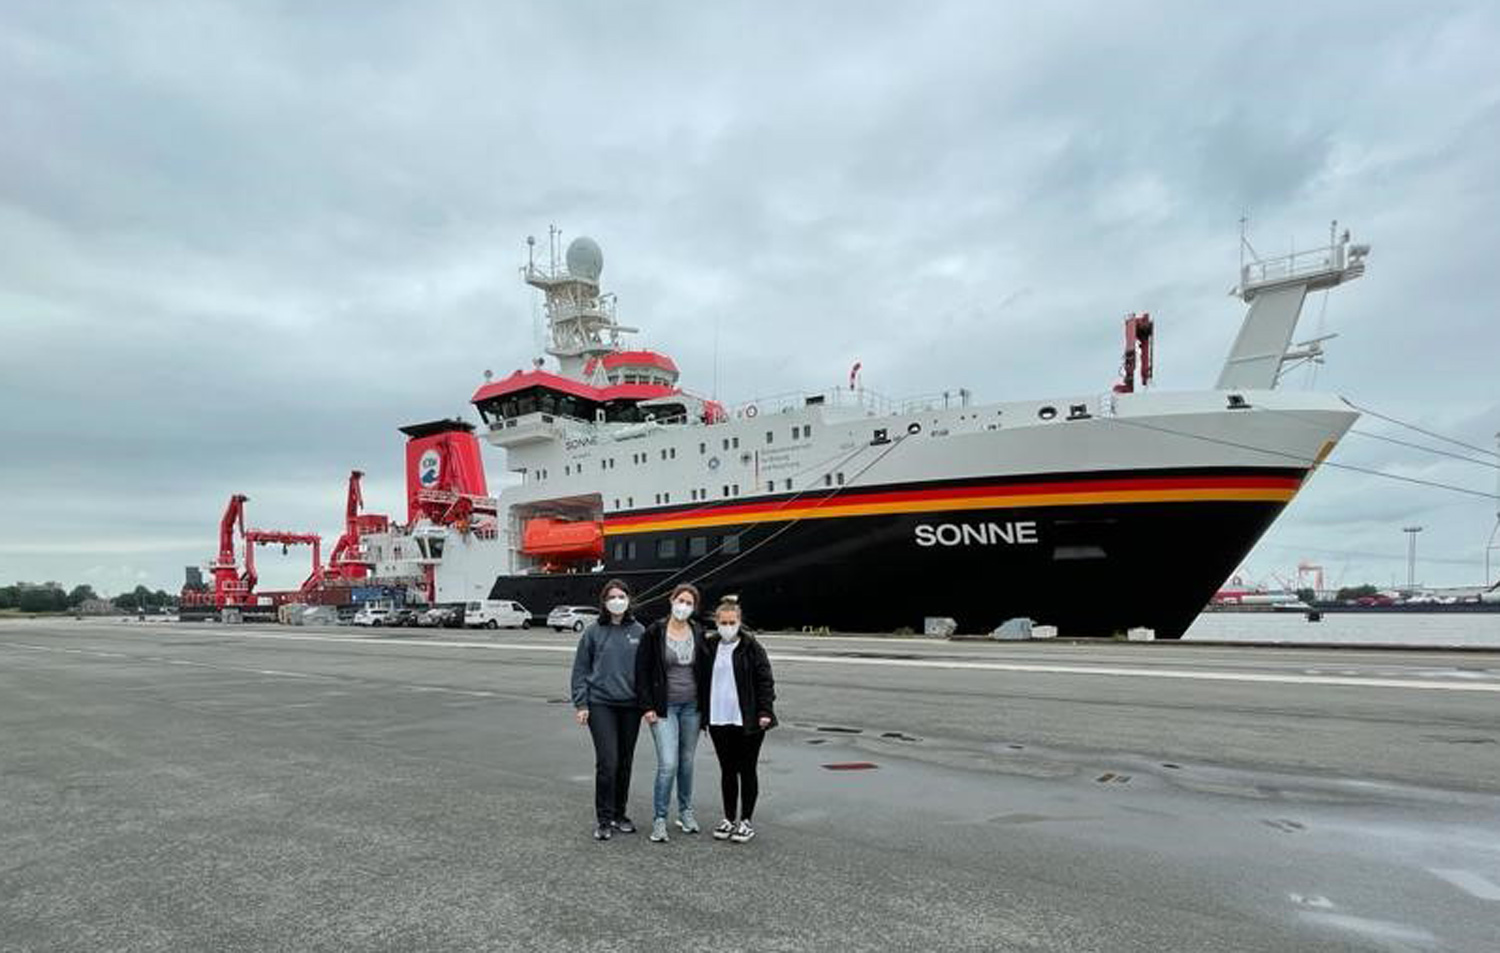 Hello, this is us, the zooplankton group, in front of the research vessel "SONNE", right before the Check-in.